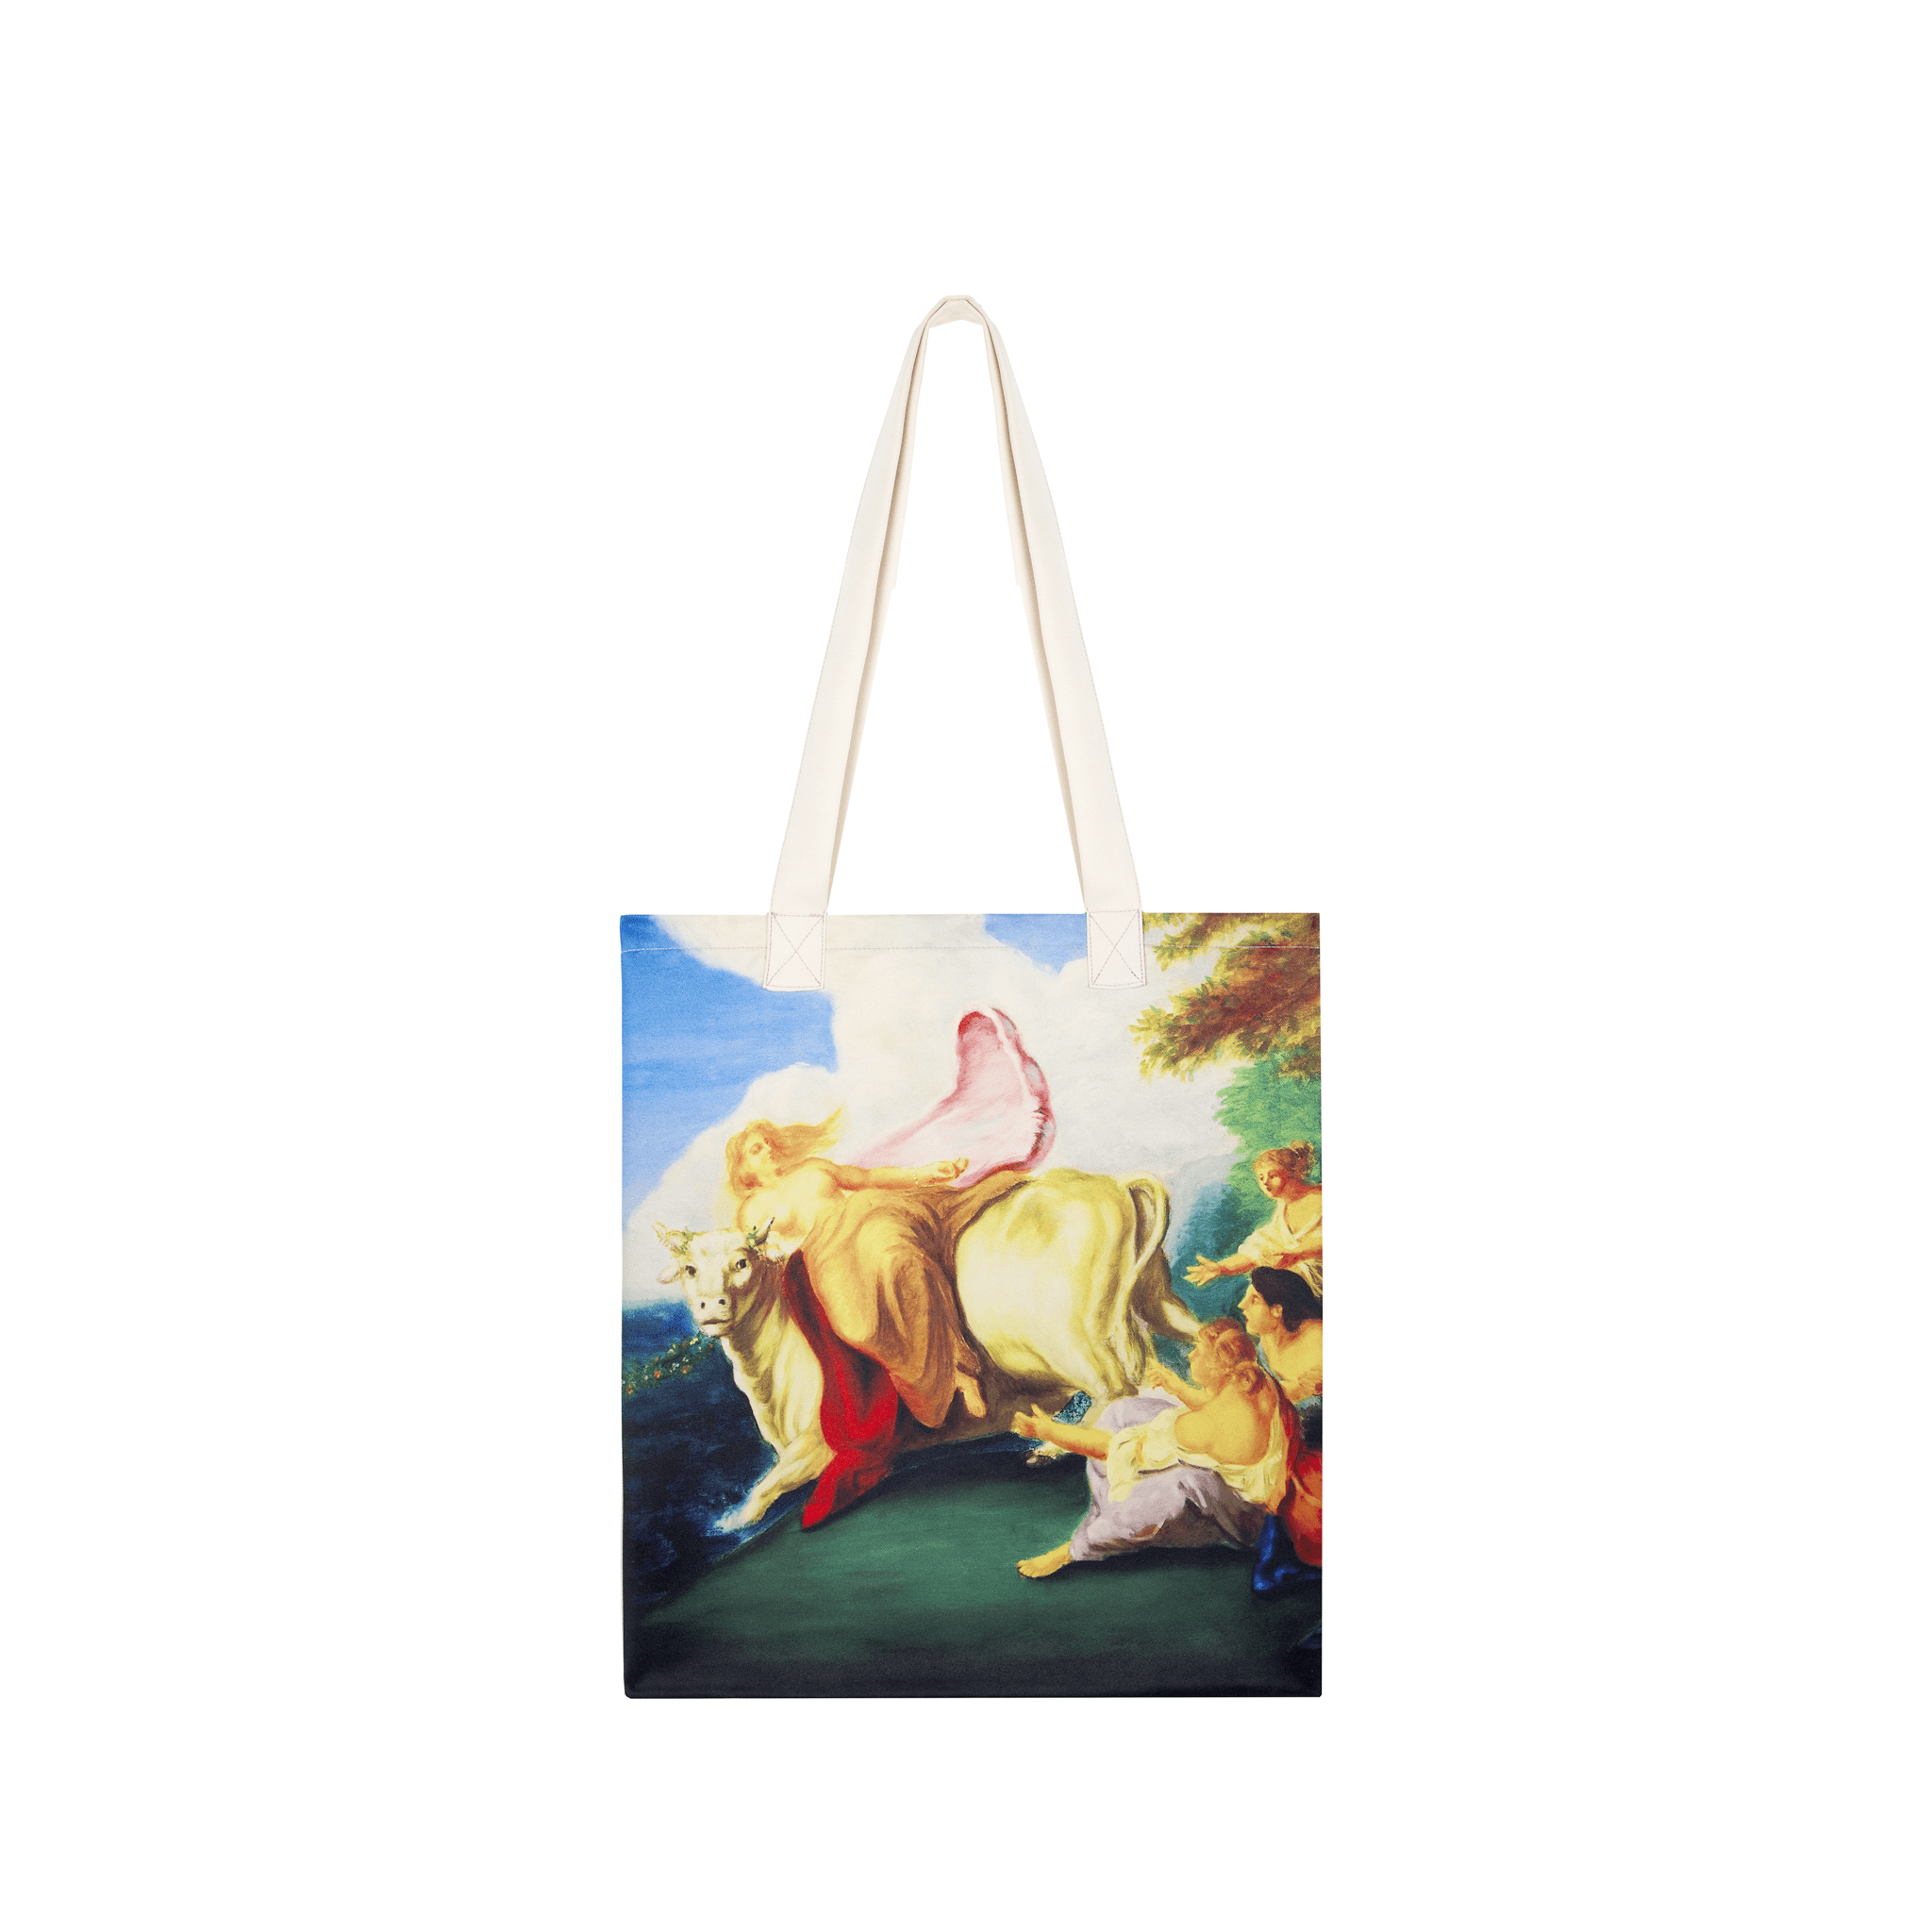 Tote bag made in Europe